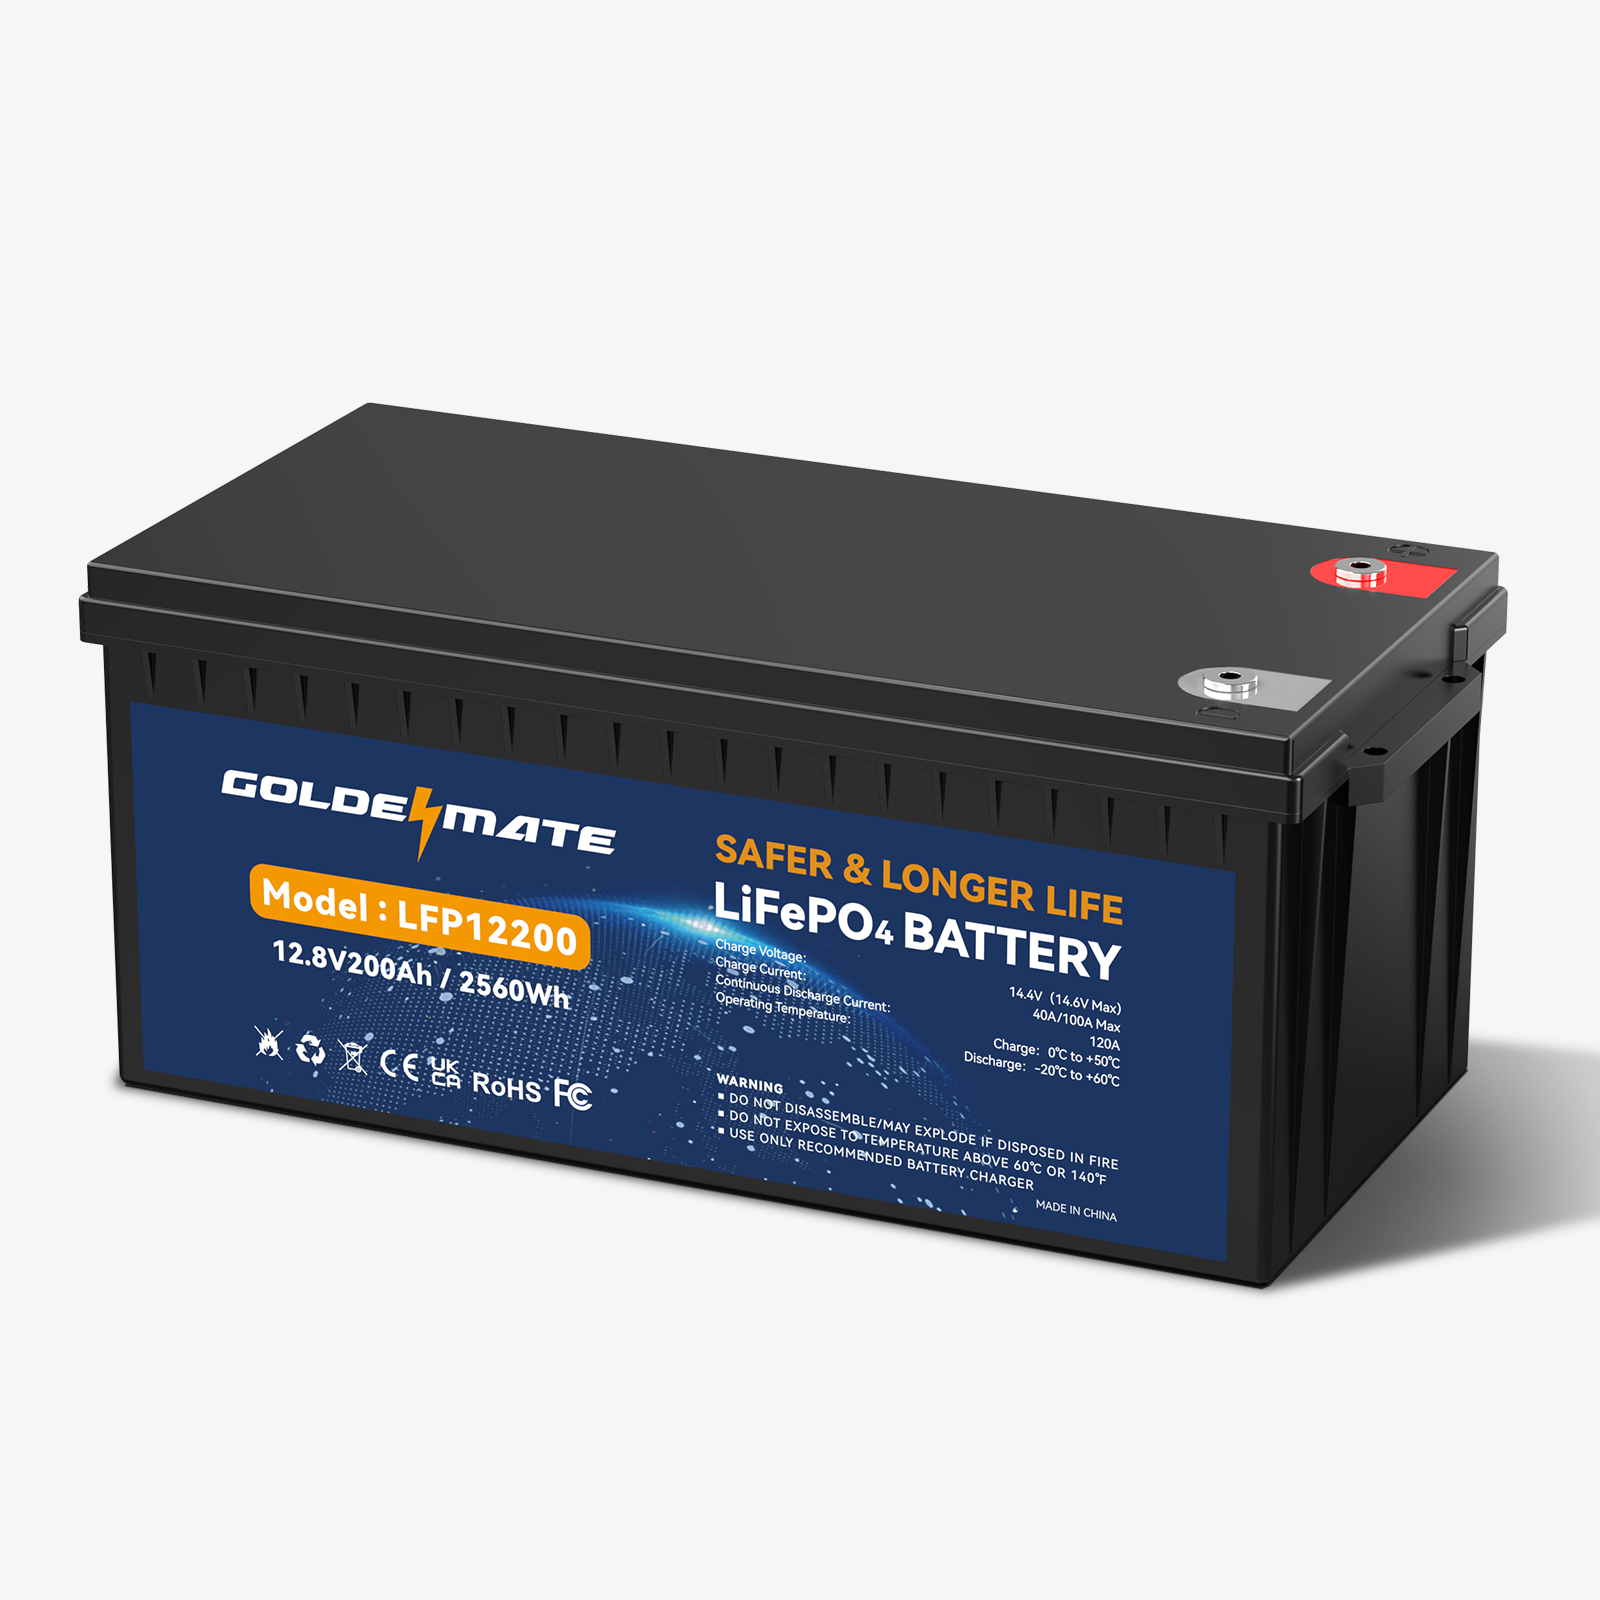 GoldenMate 12V 200Ah LiFePO4 Lithium Battery, 2560Wh Energy, Build-In BMS